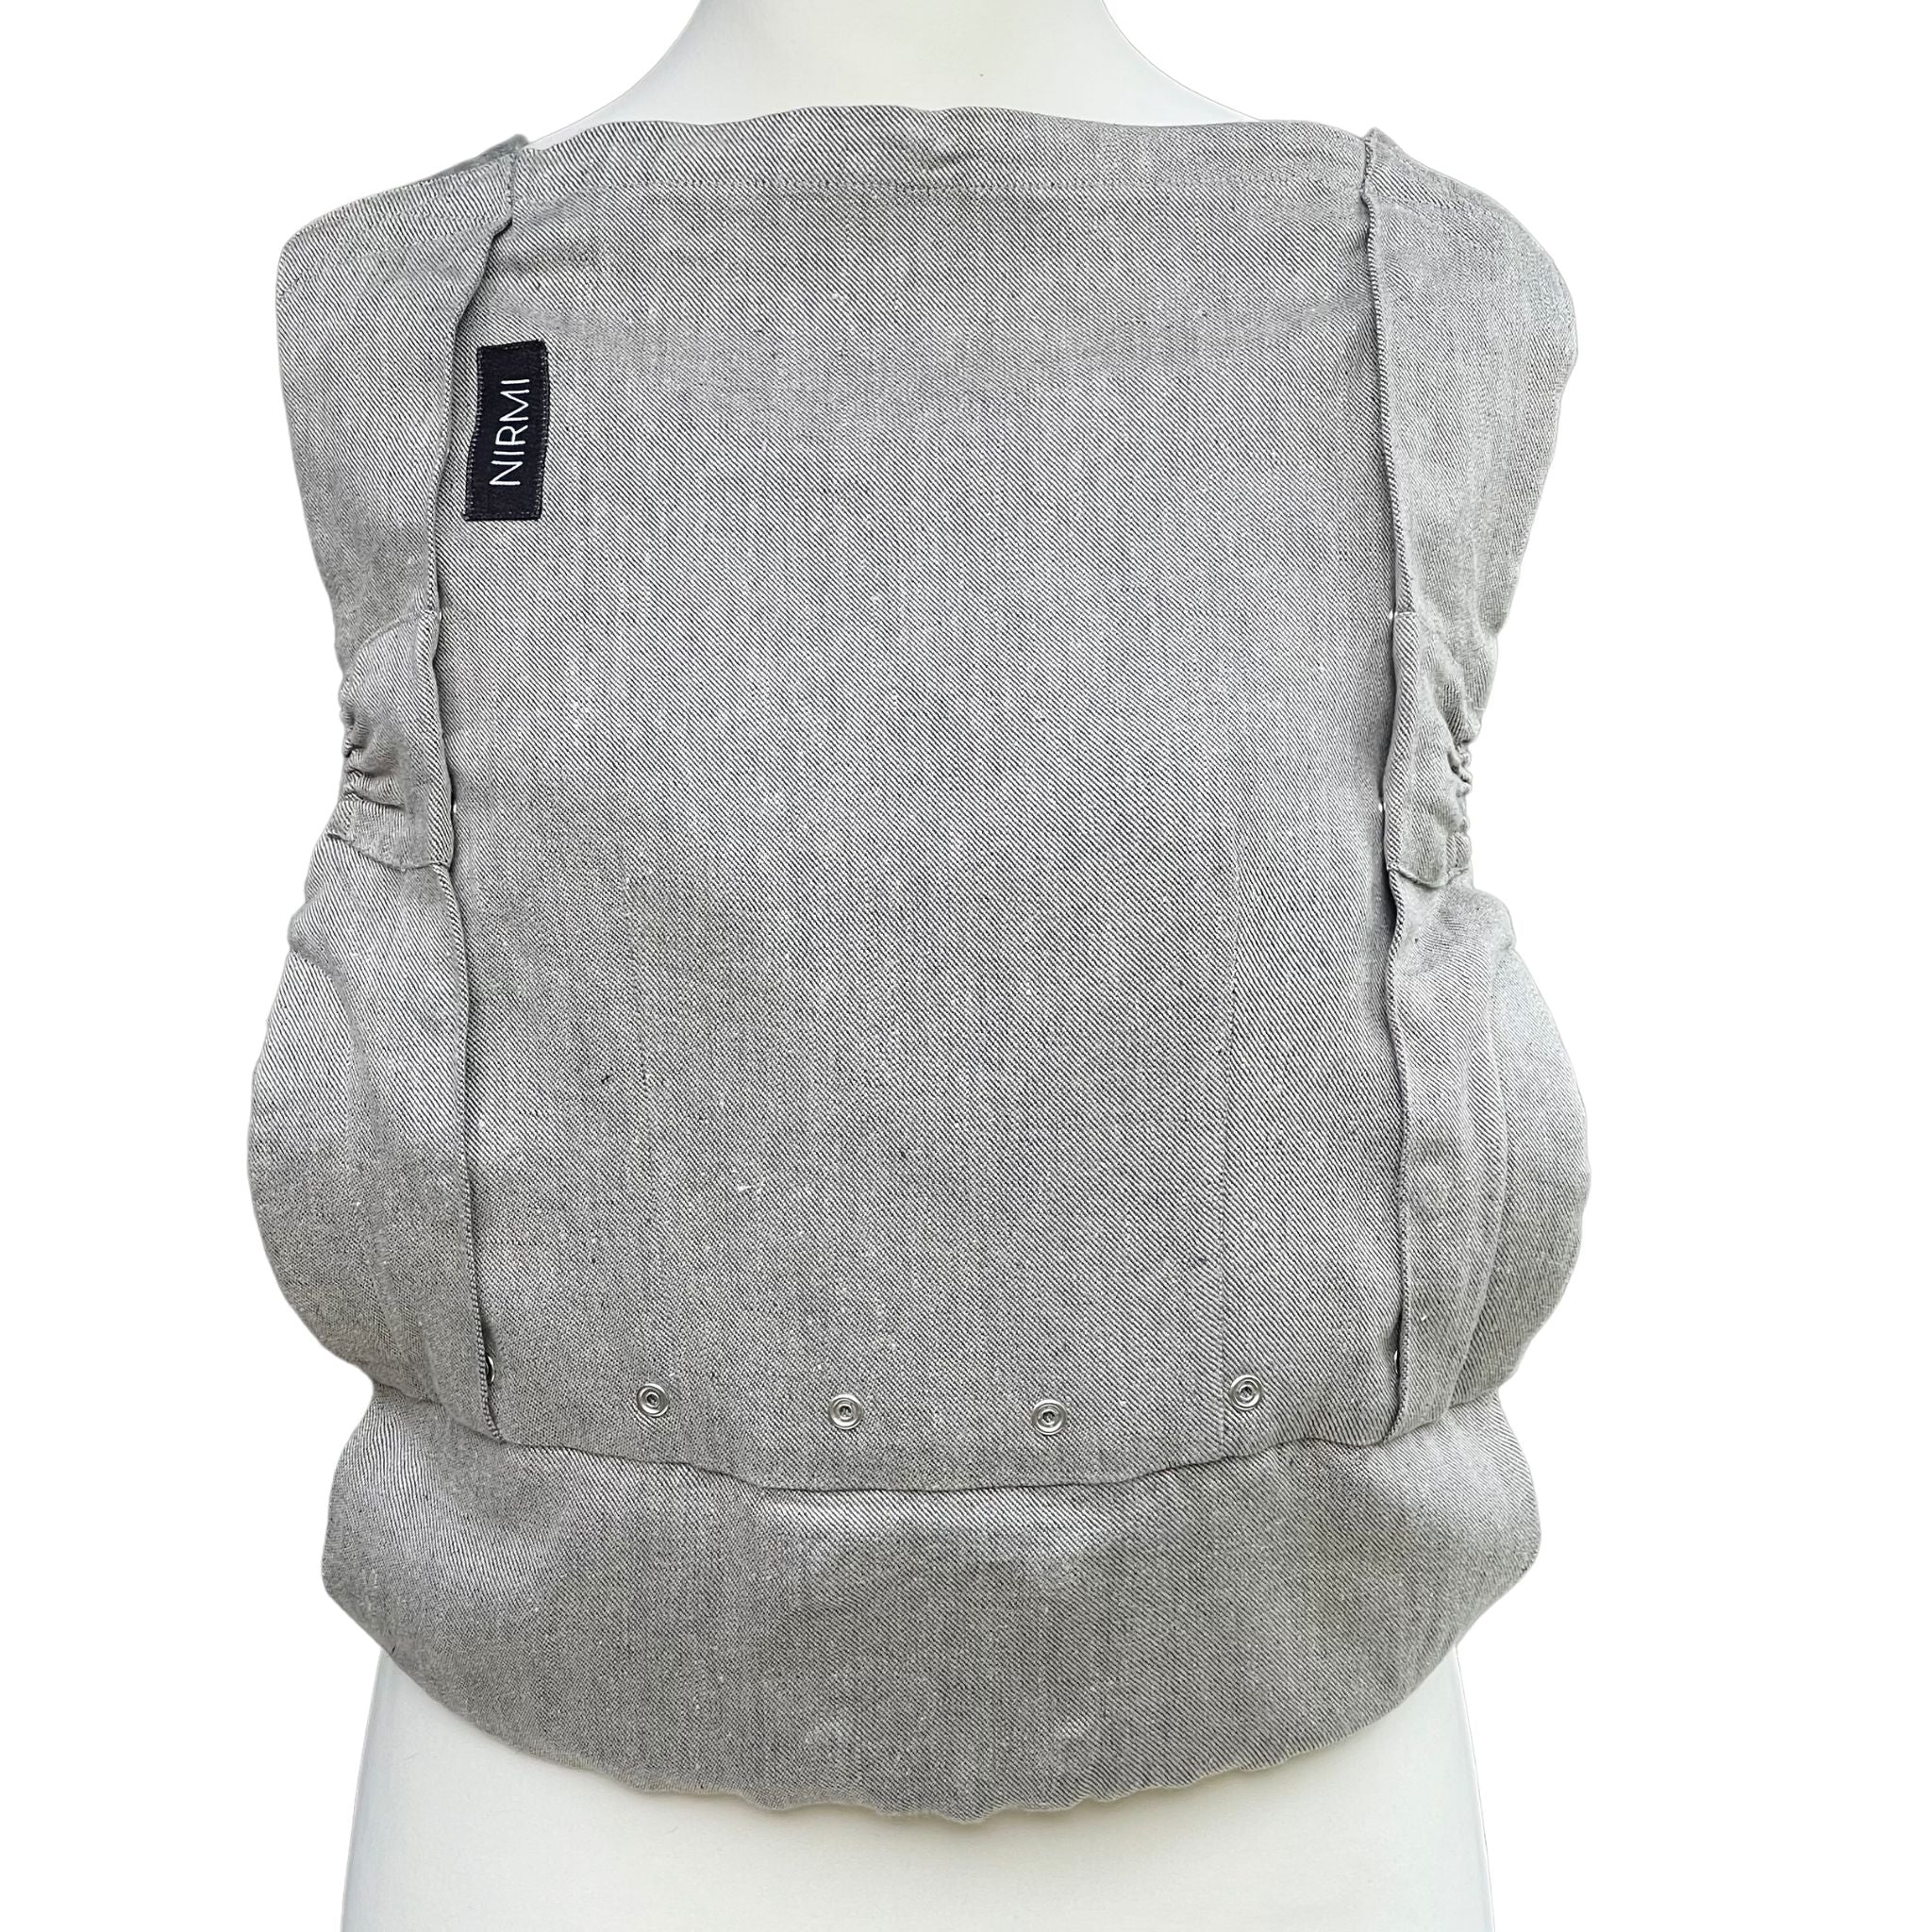 NIRMI baby carrier + €50 voucher for a patch of your choice